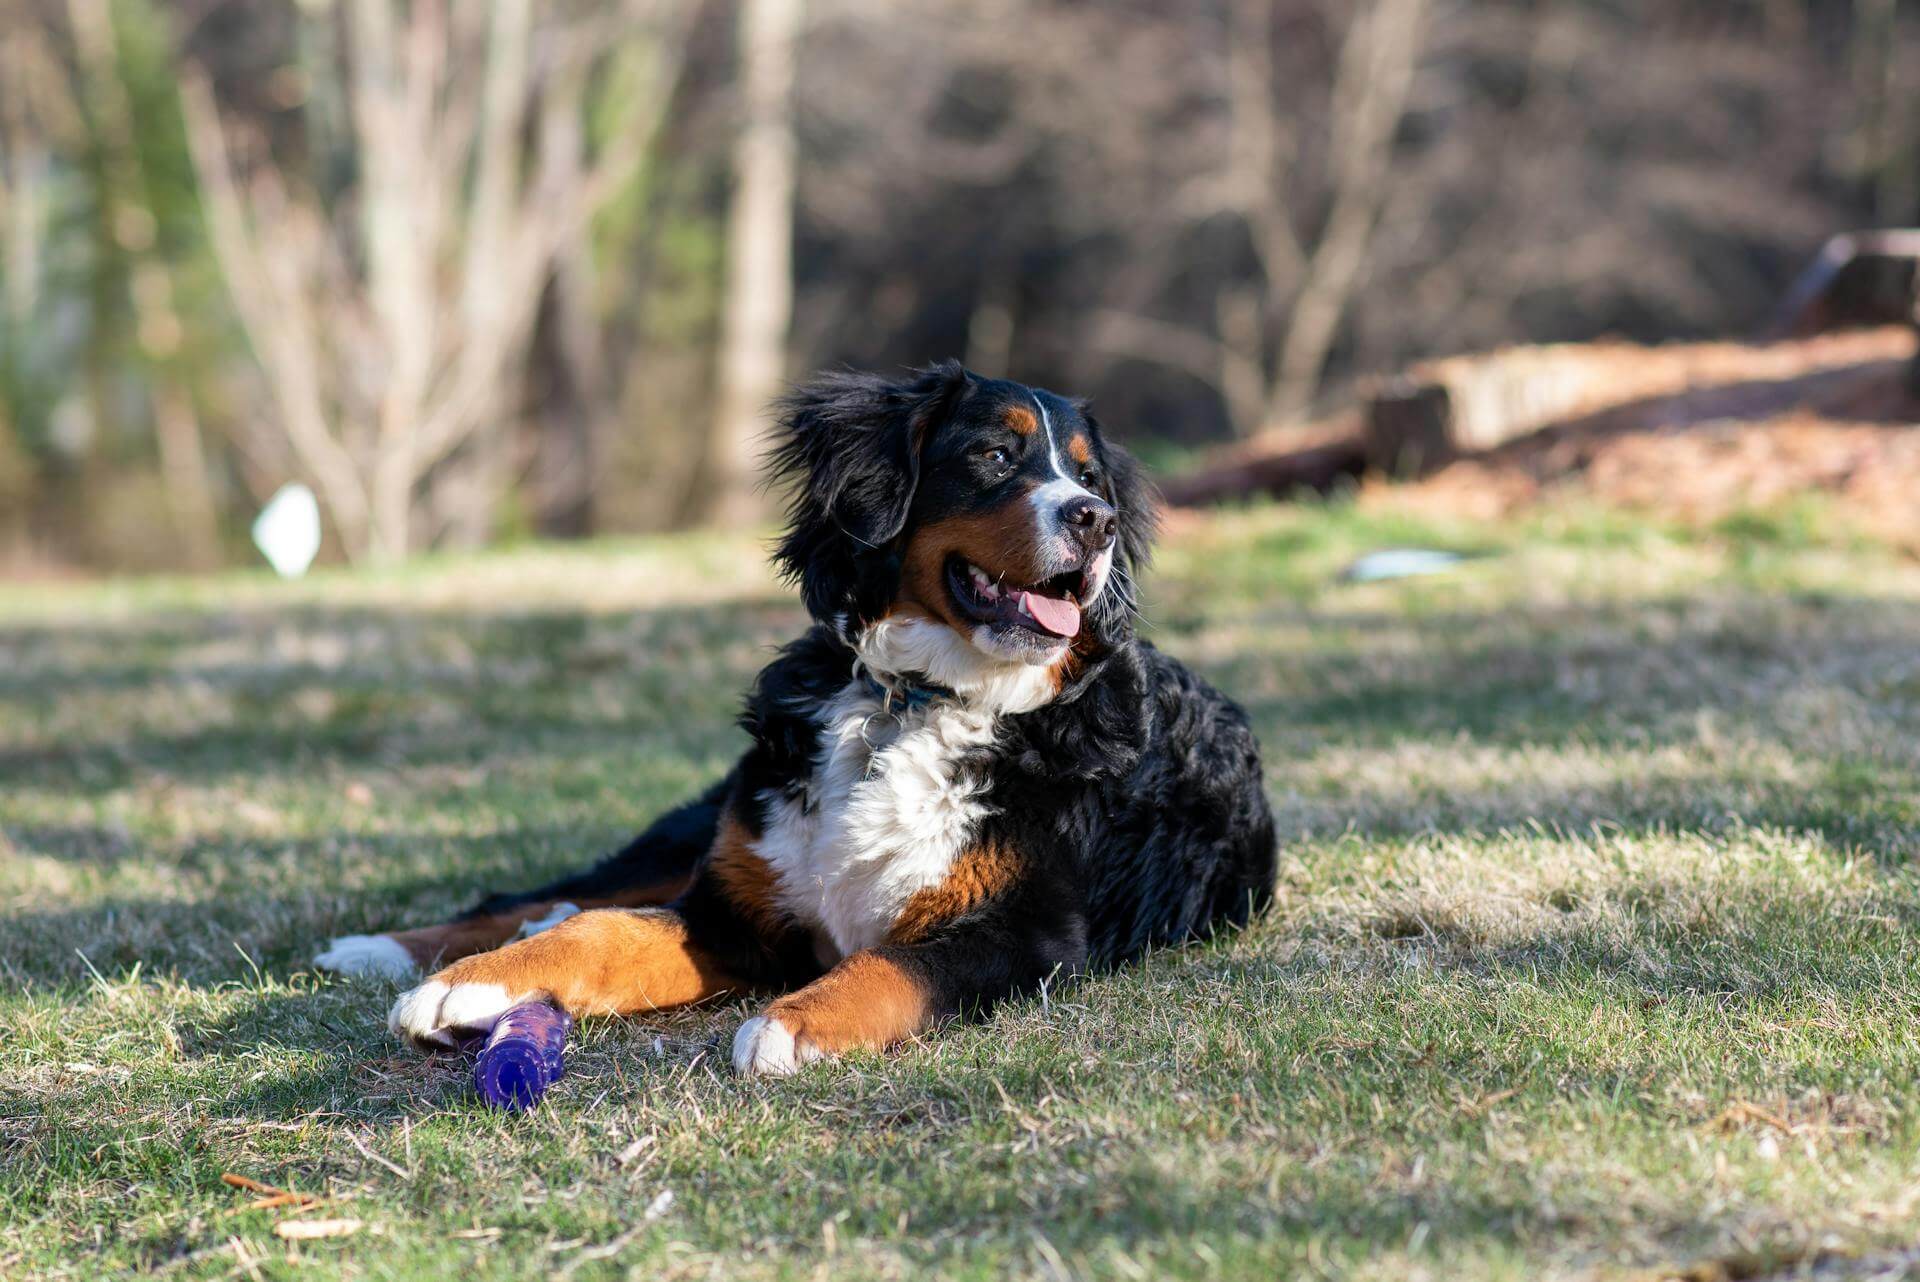 A Bernese Mountain Dog on the Grass